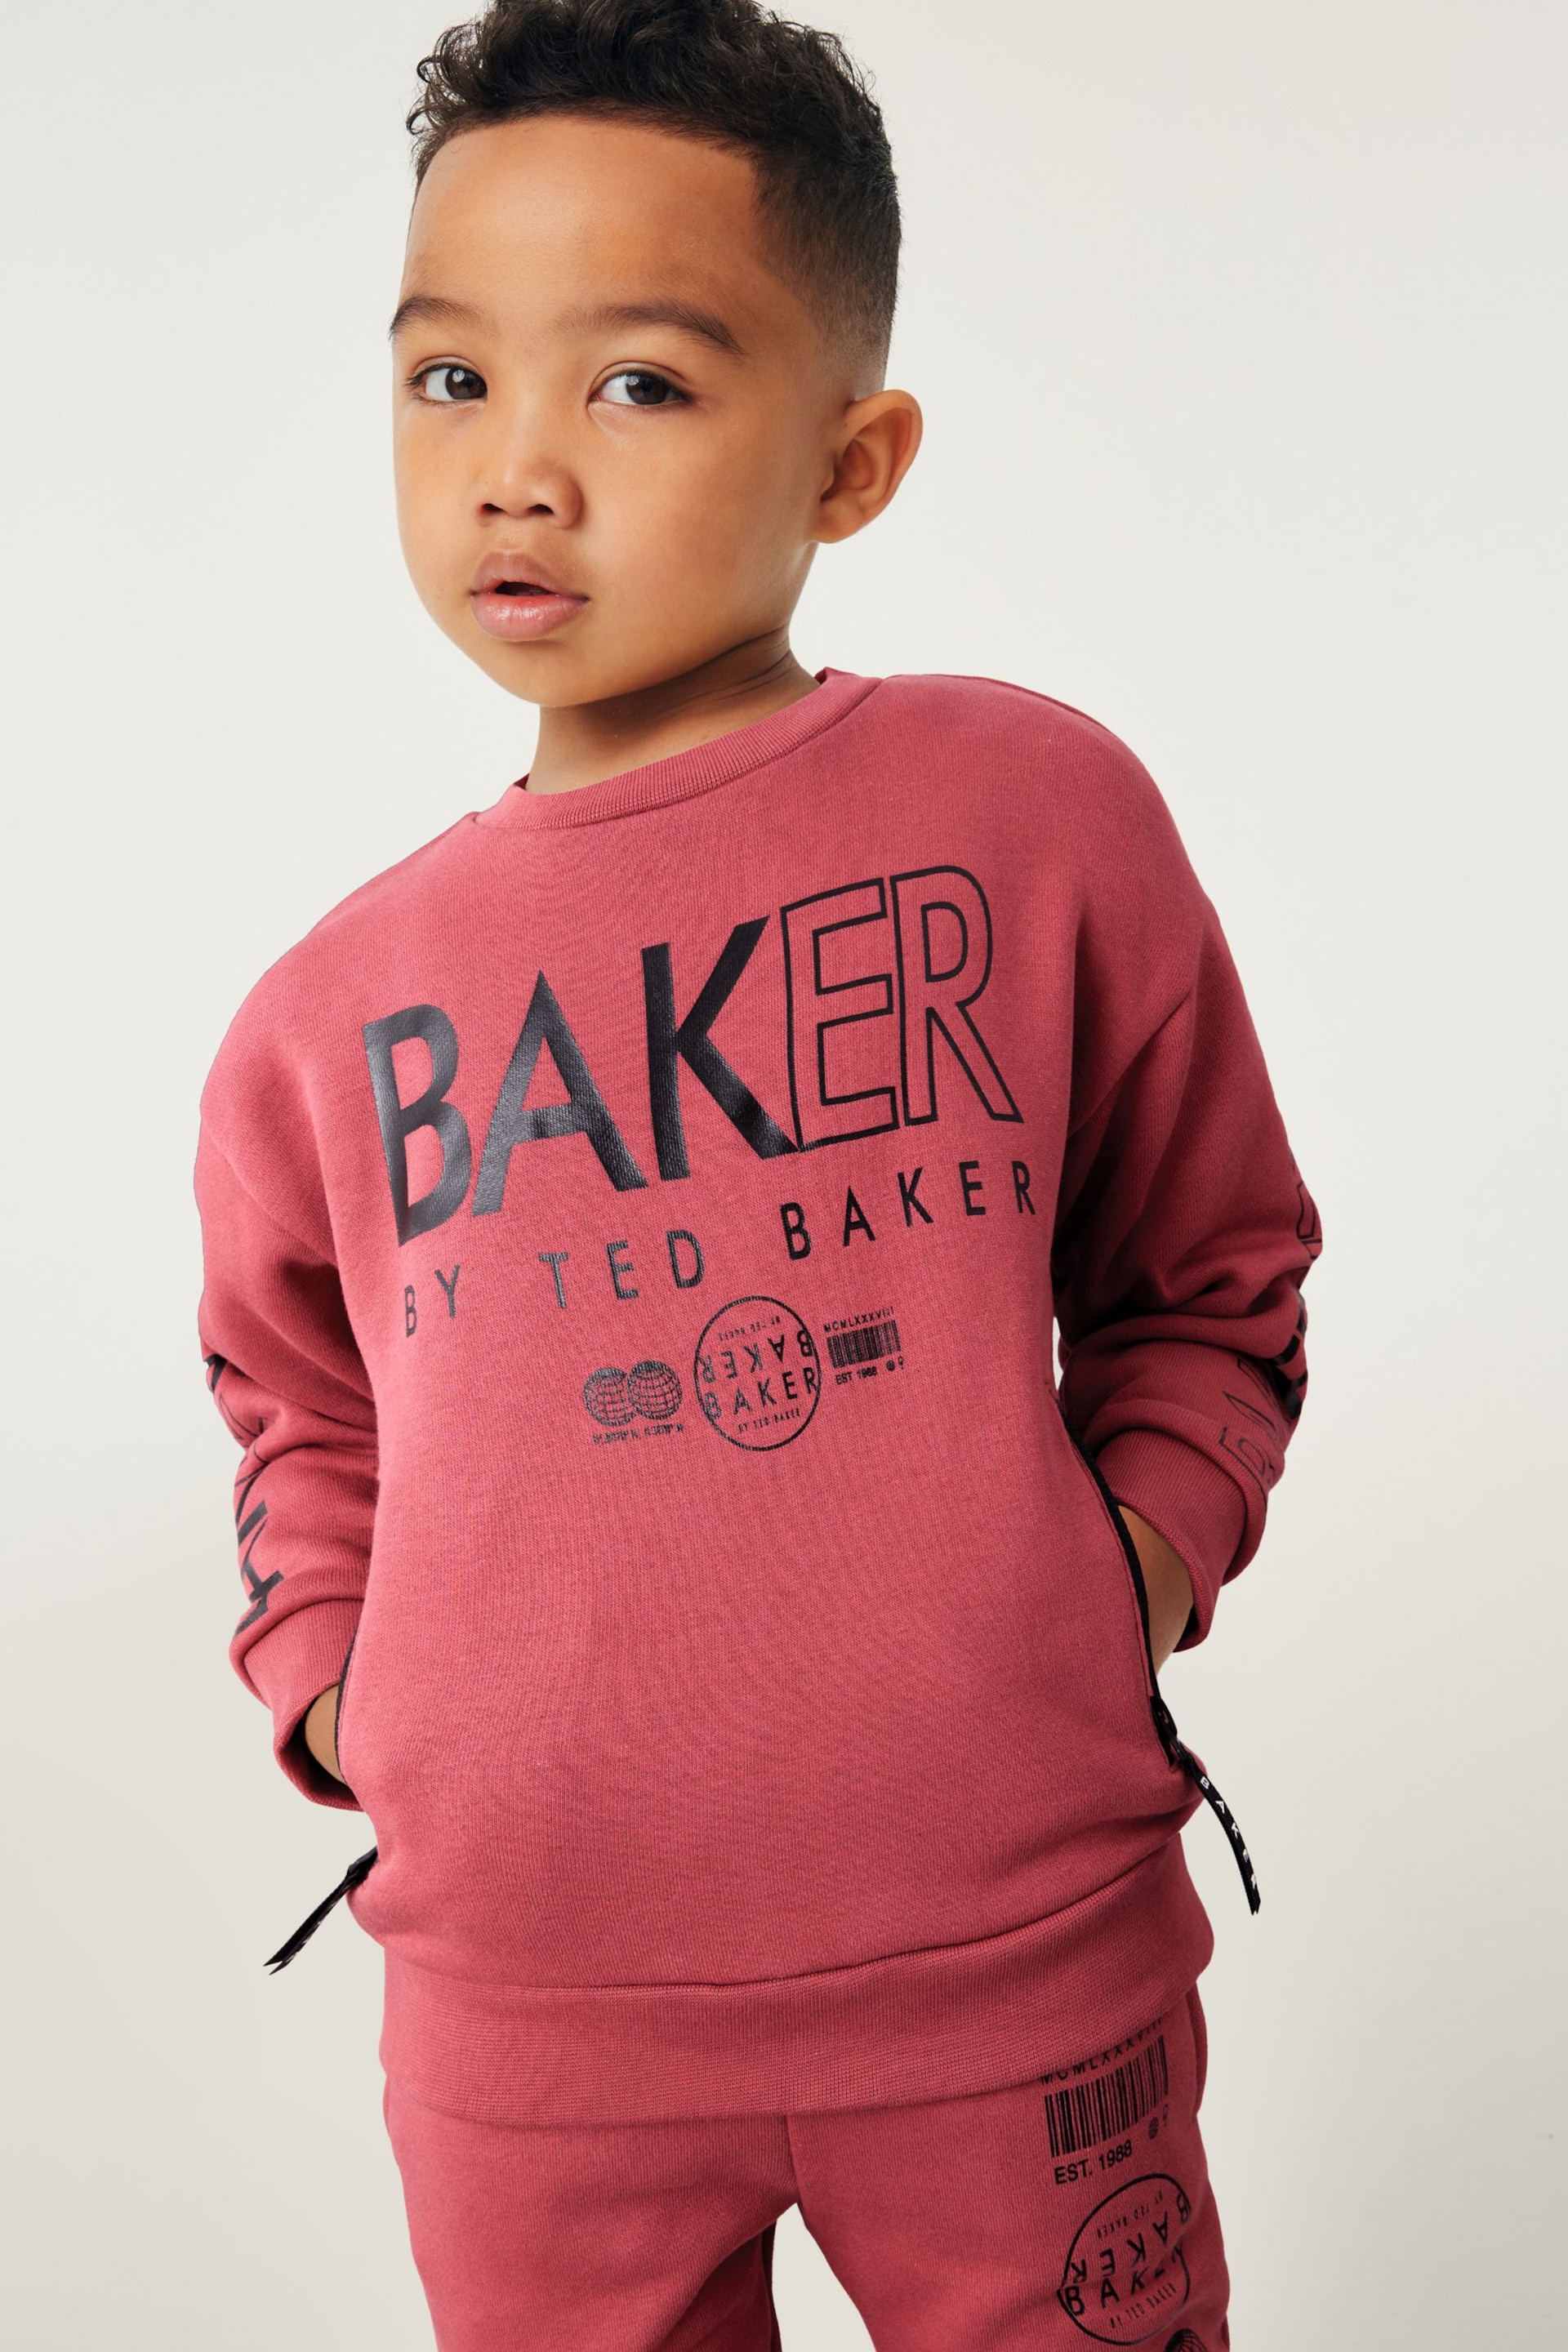 Baker by Ted Baker (0-6yrs) Letter Sweater and Jogger Set - Image 3 of 11